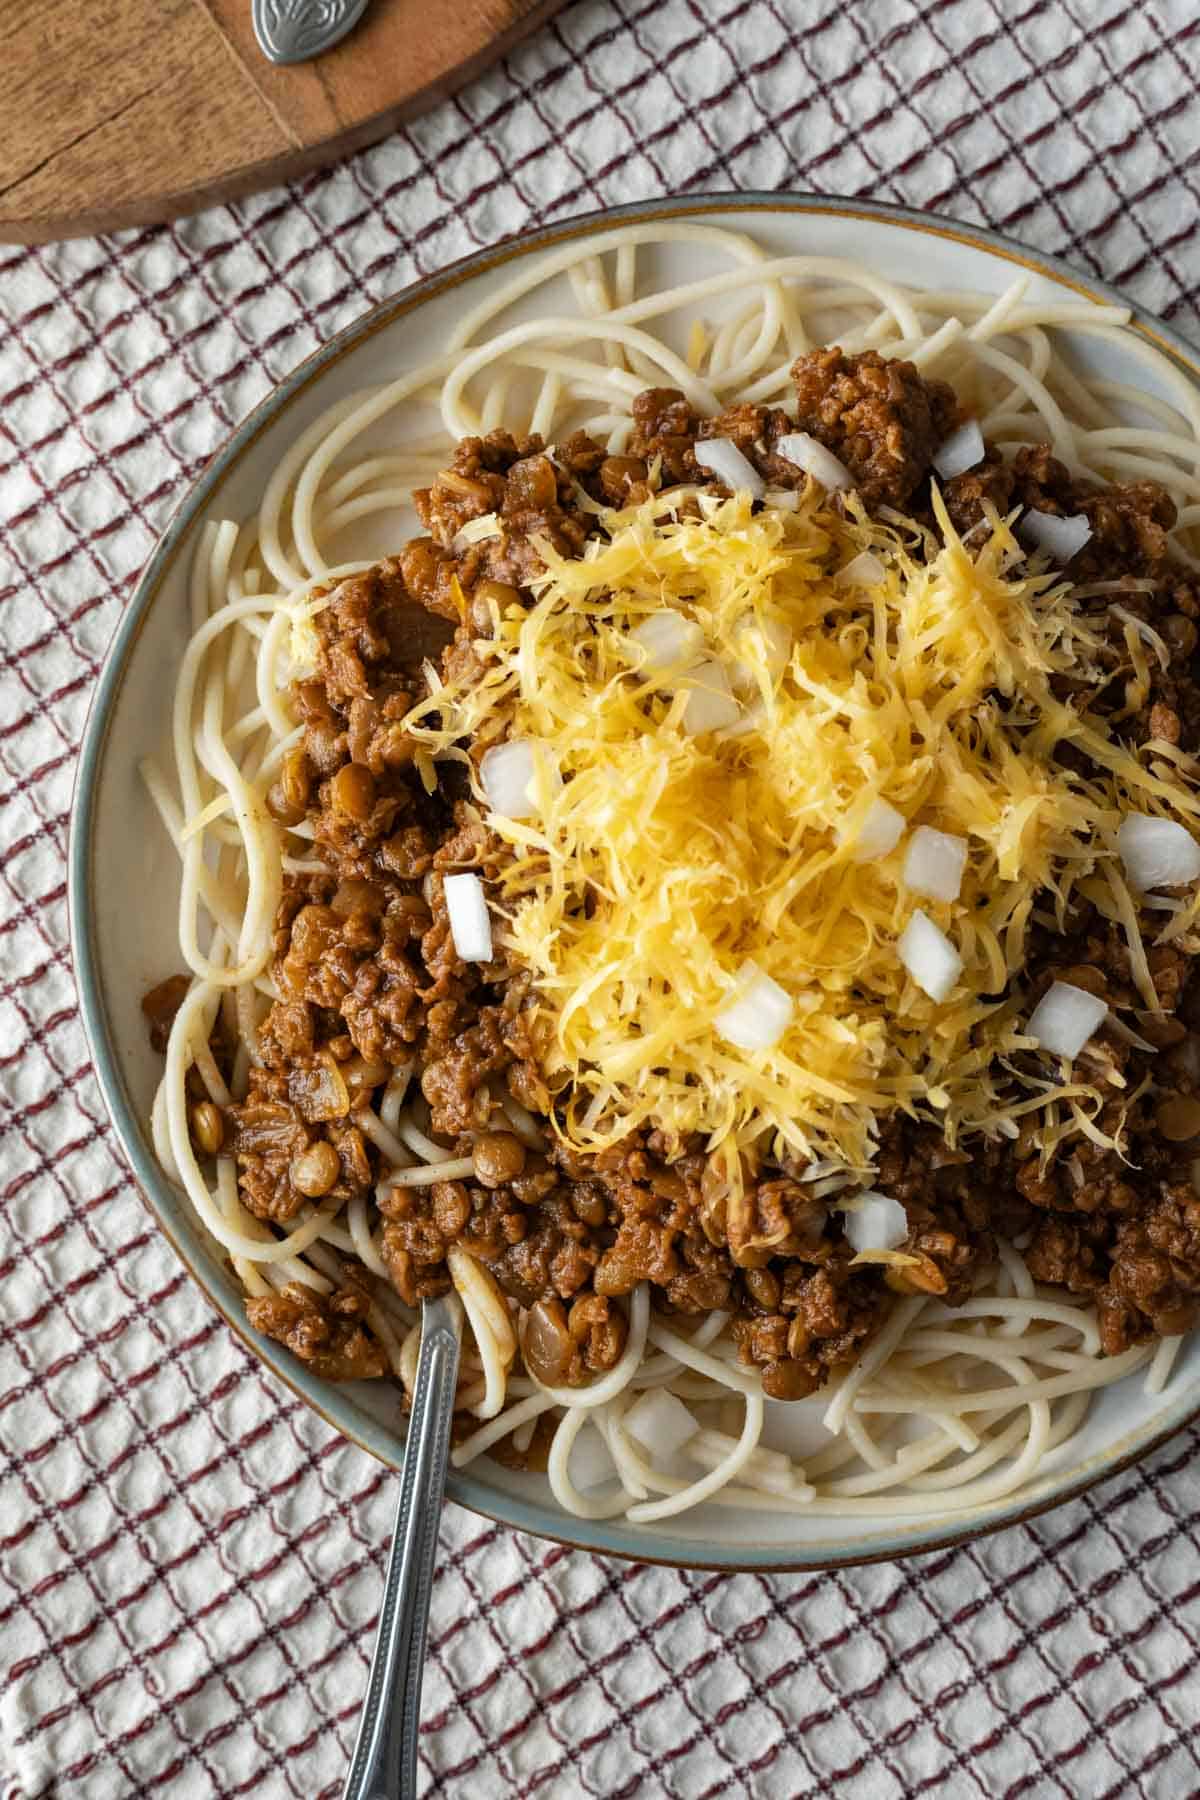 Serving of vegan Cincinnati chili over spaghetti topped with cheddar and onion.